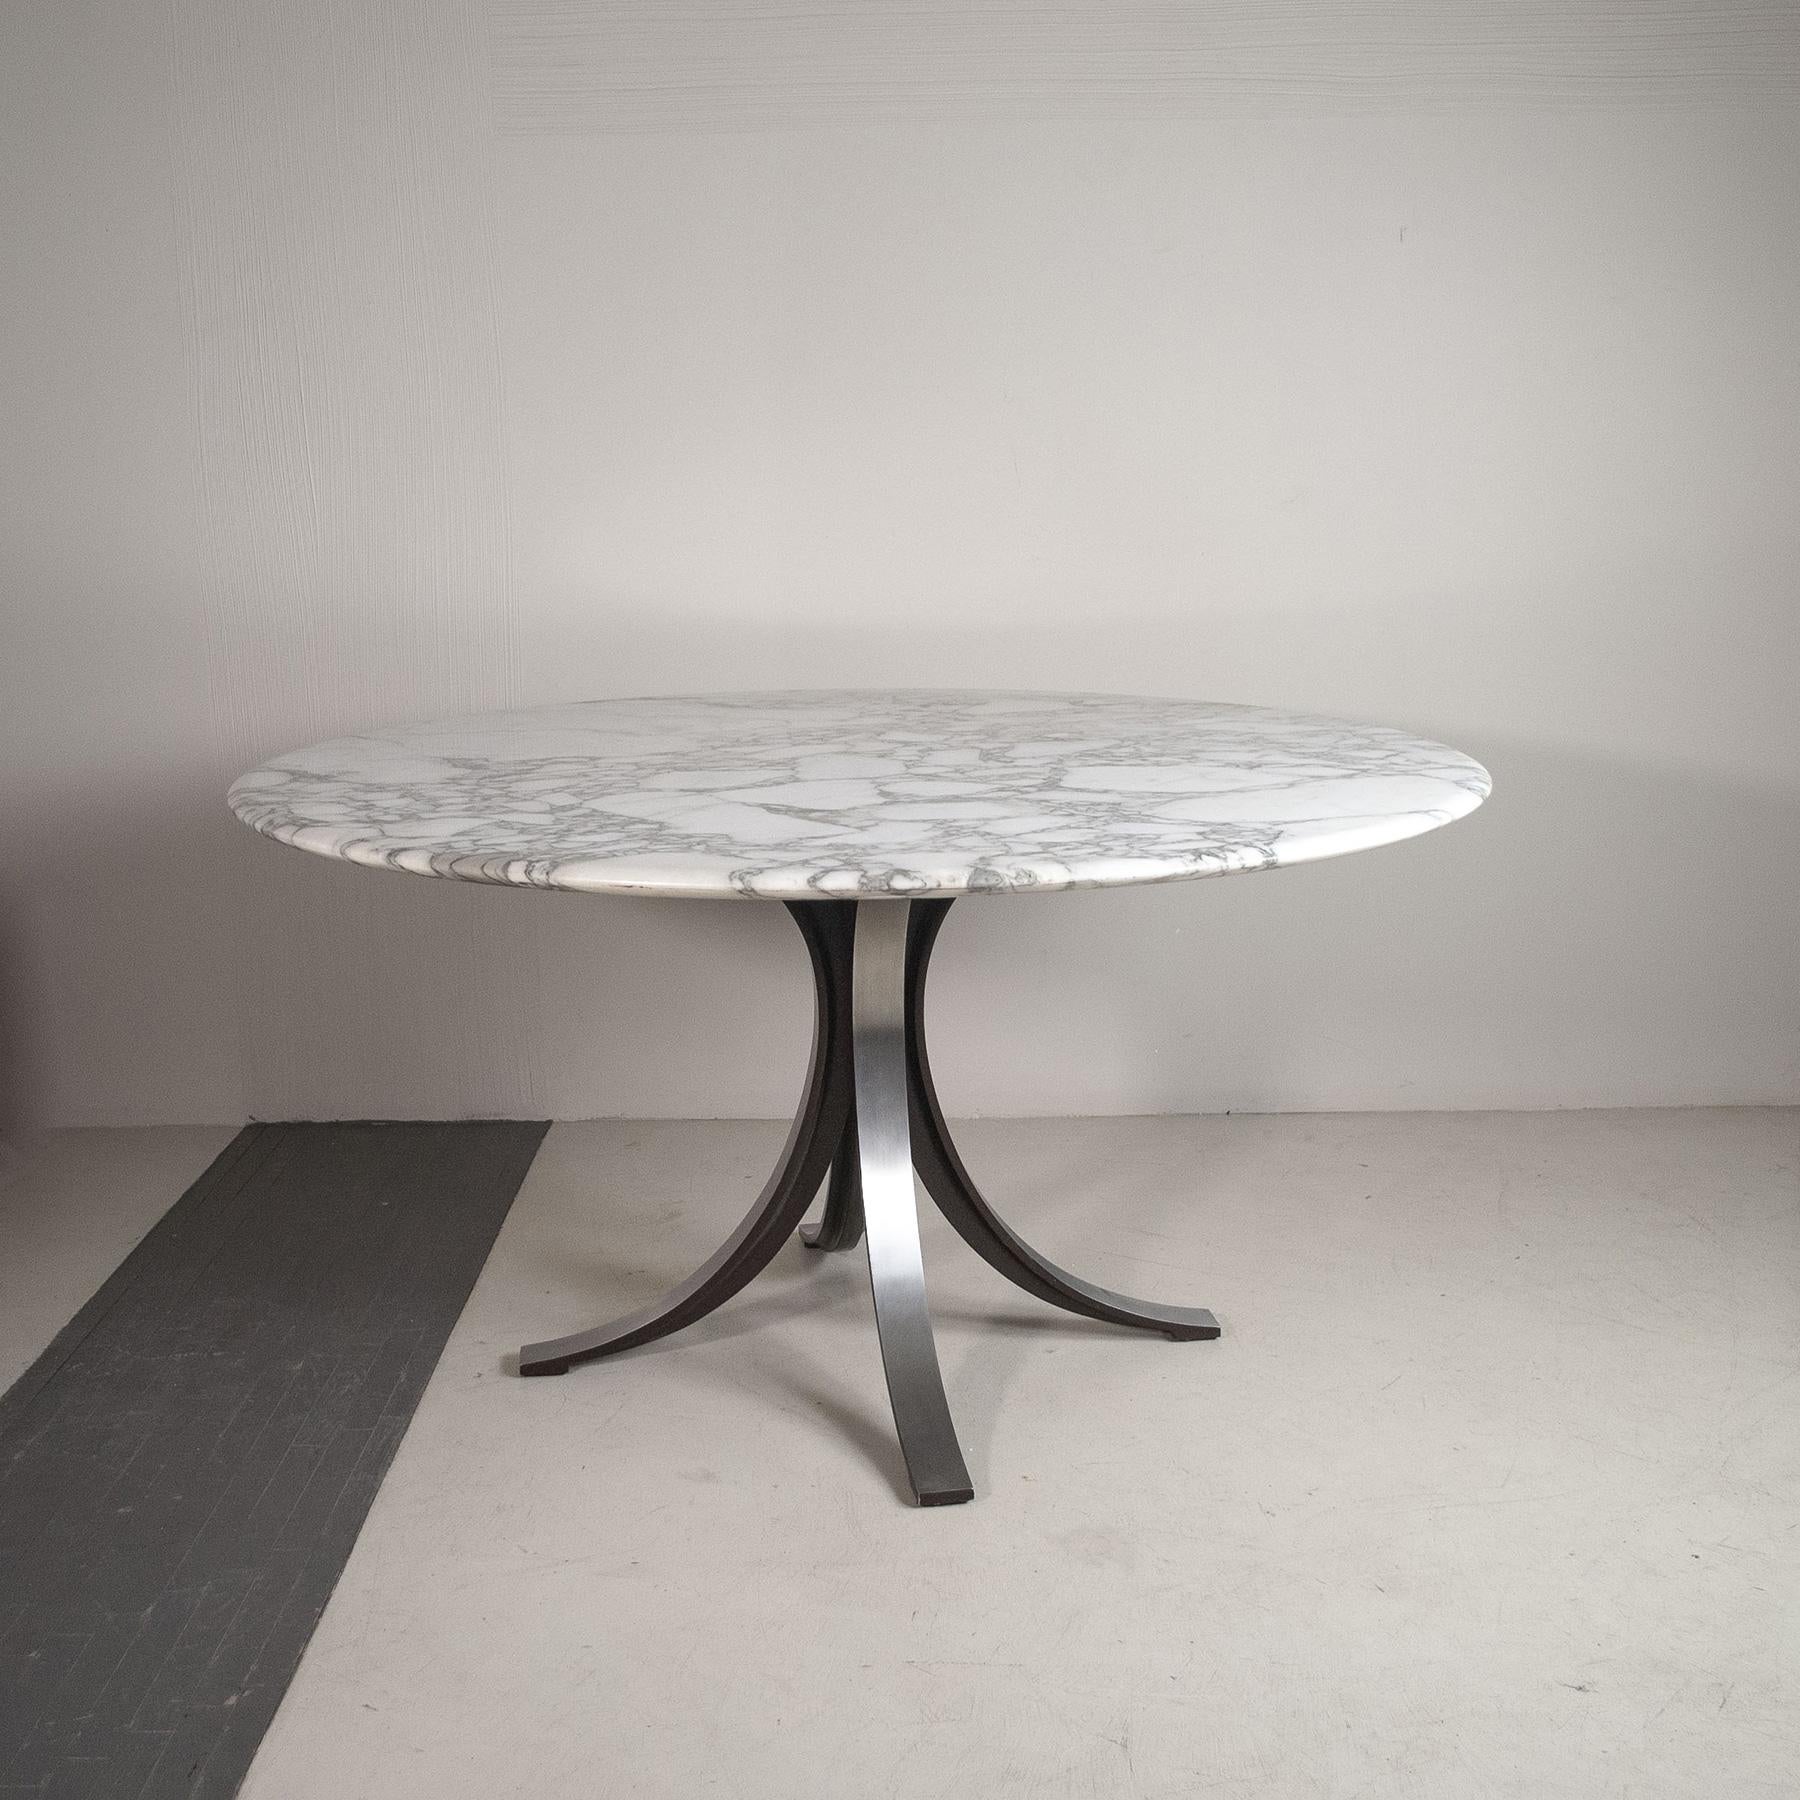 A classic of Italian design from the 1960s. Round table model T69 with Arabesque Carrara marble top, rare, production Tecno designers Osvaldo Borsani & Eugenio Gerli. The particularity of T69 is the structural base that has a strong graphic